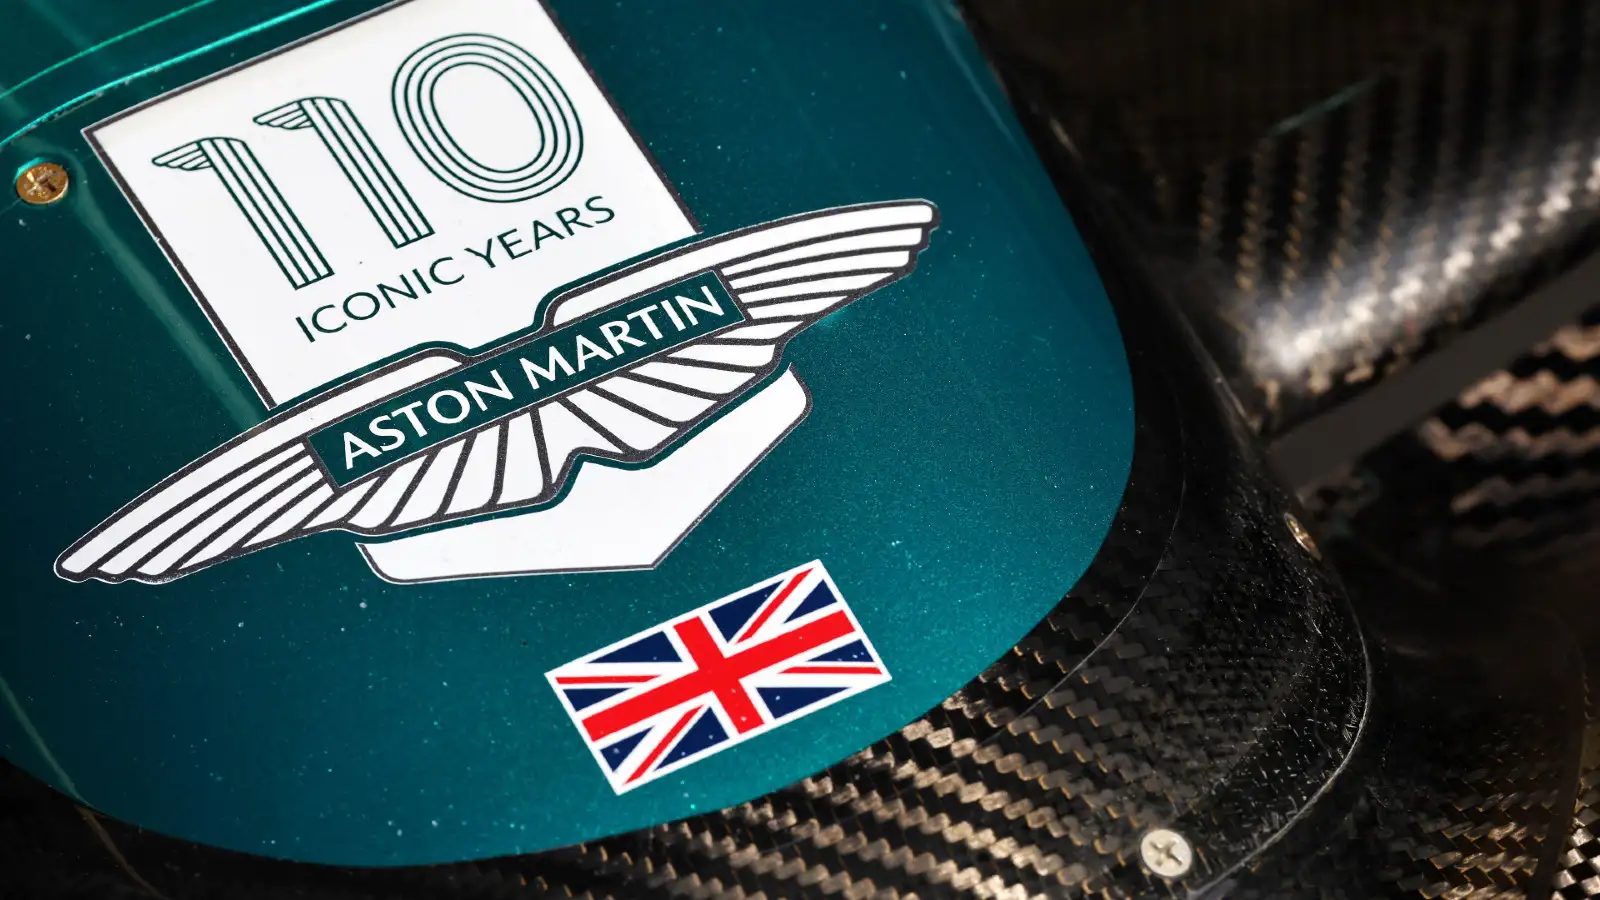 An Aston Martin F1 nosecone, pictured during the Italian Grand Prix weekend.